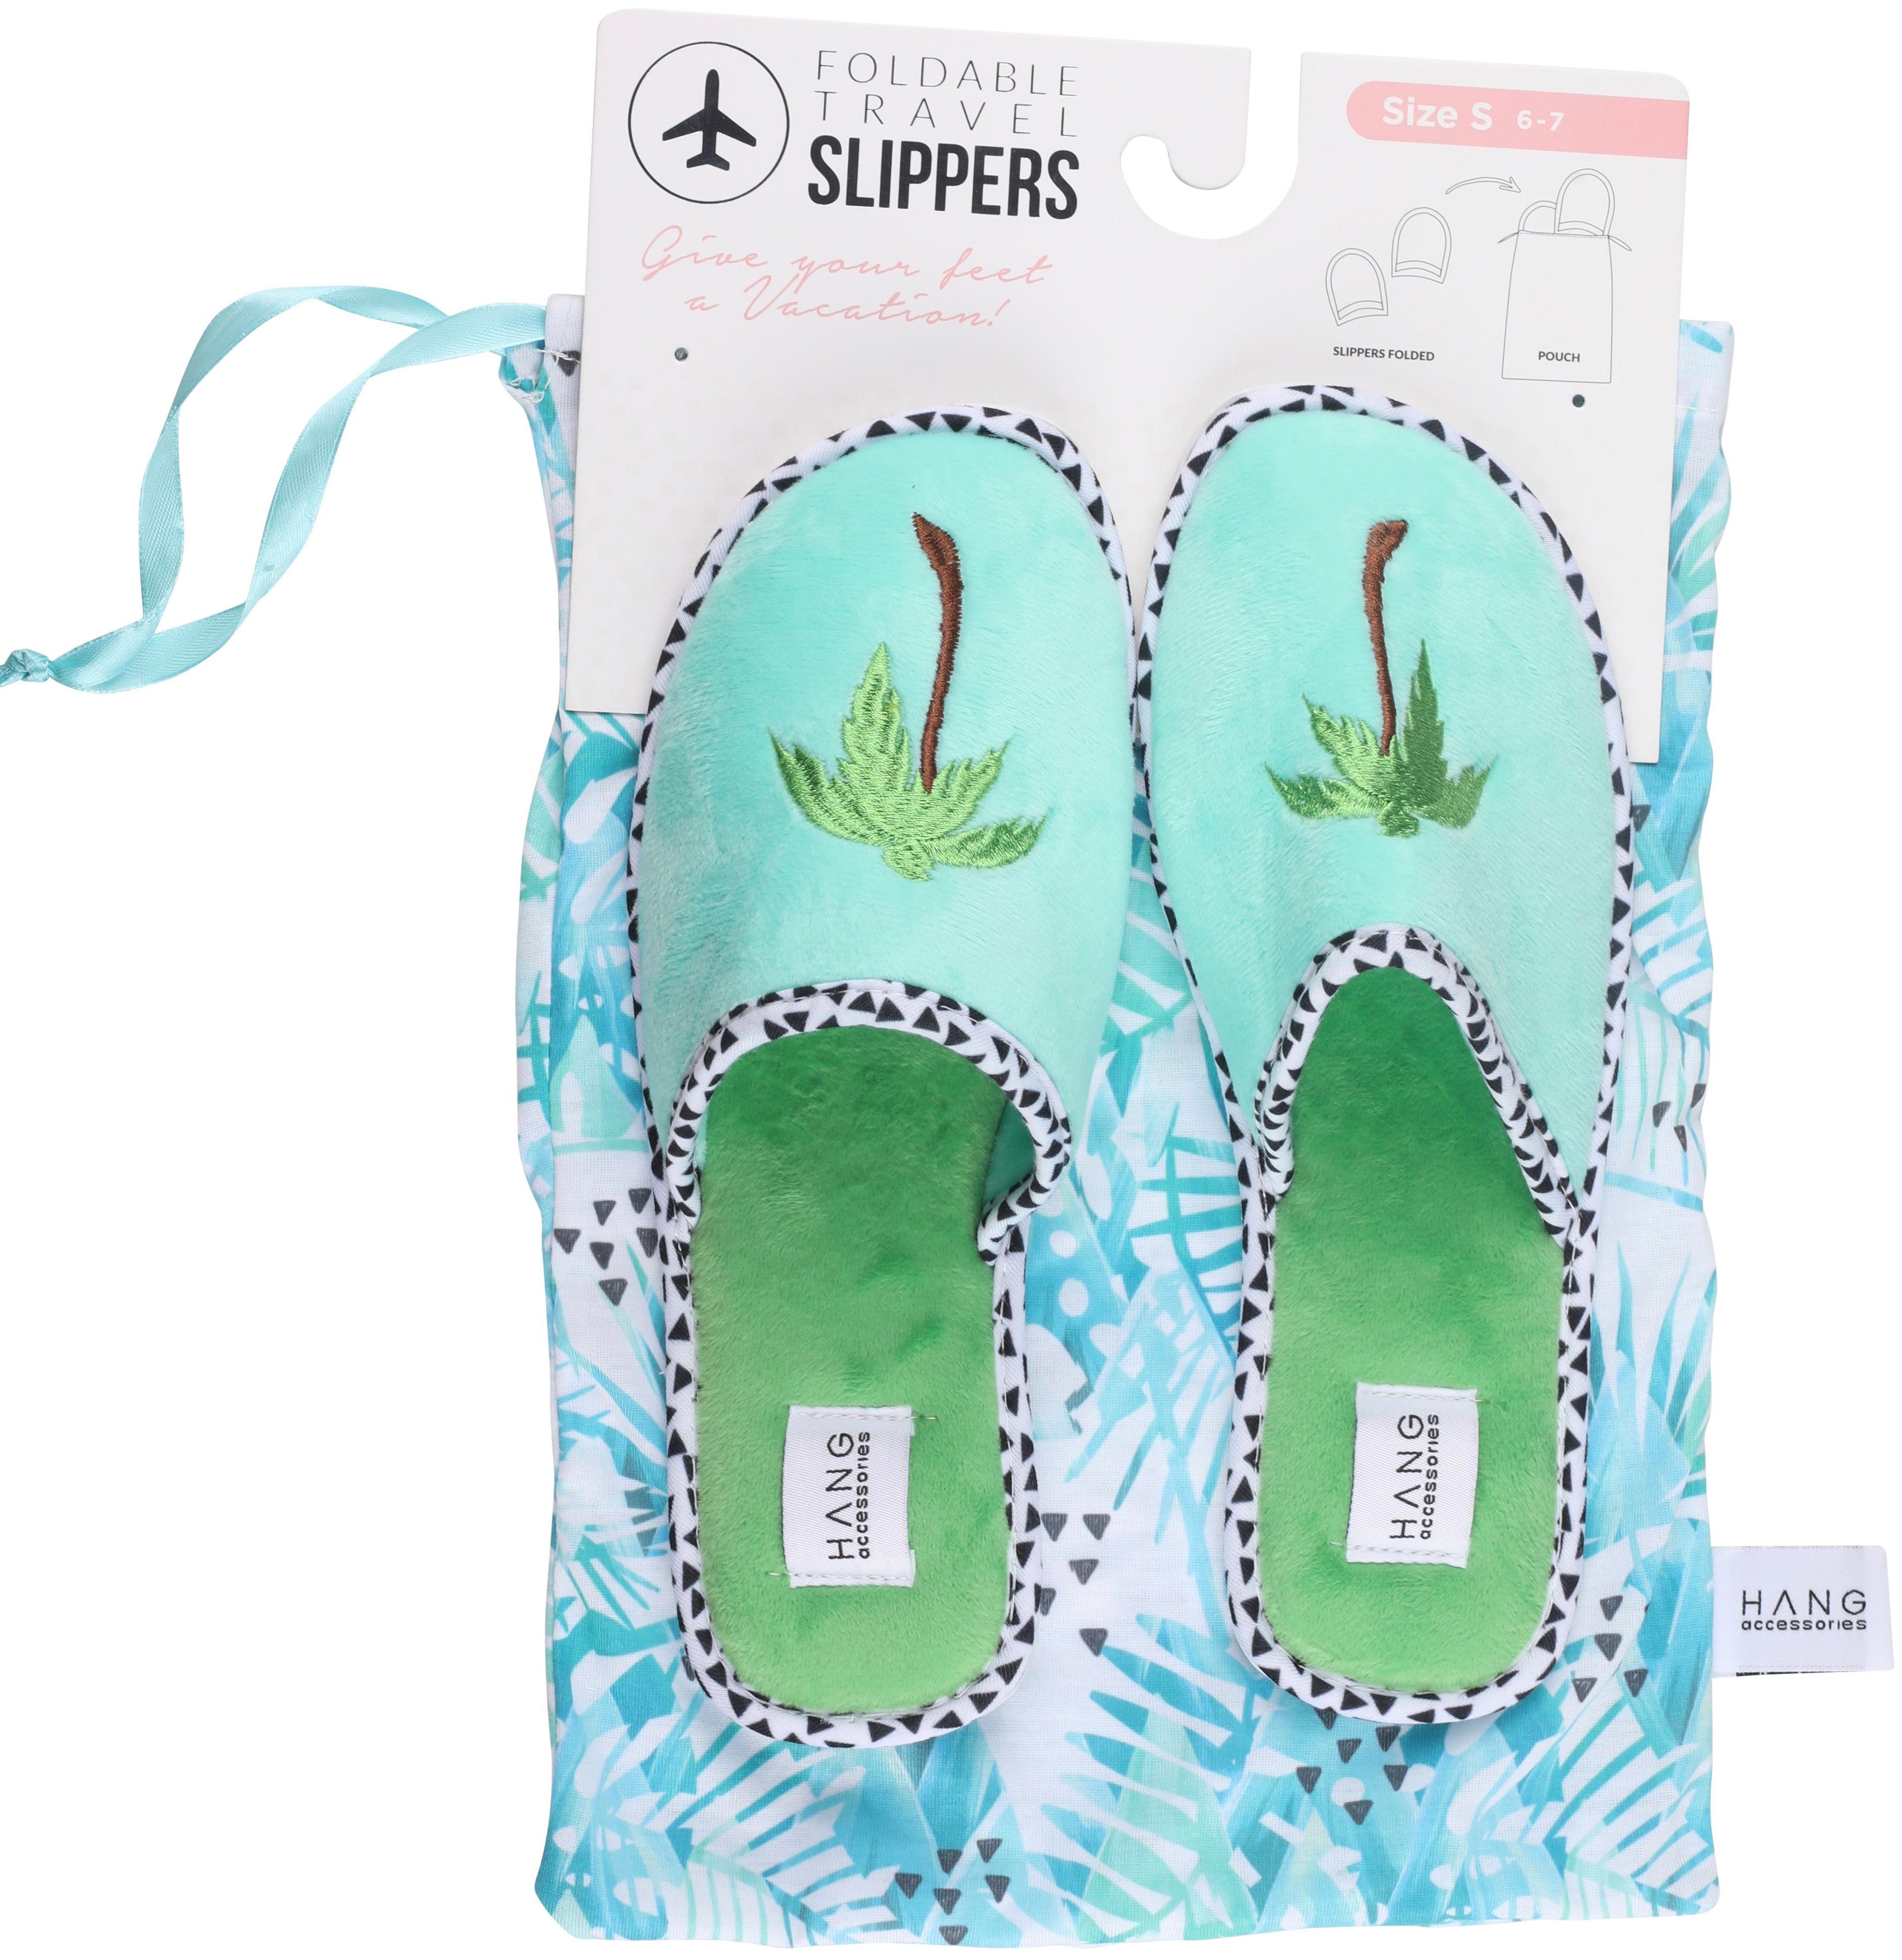 Quality palm slippers available in store it comes in a carton